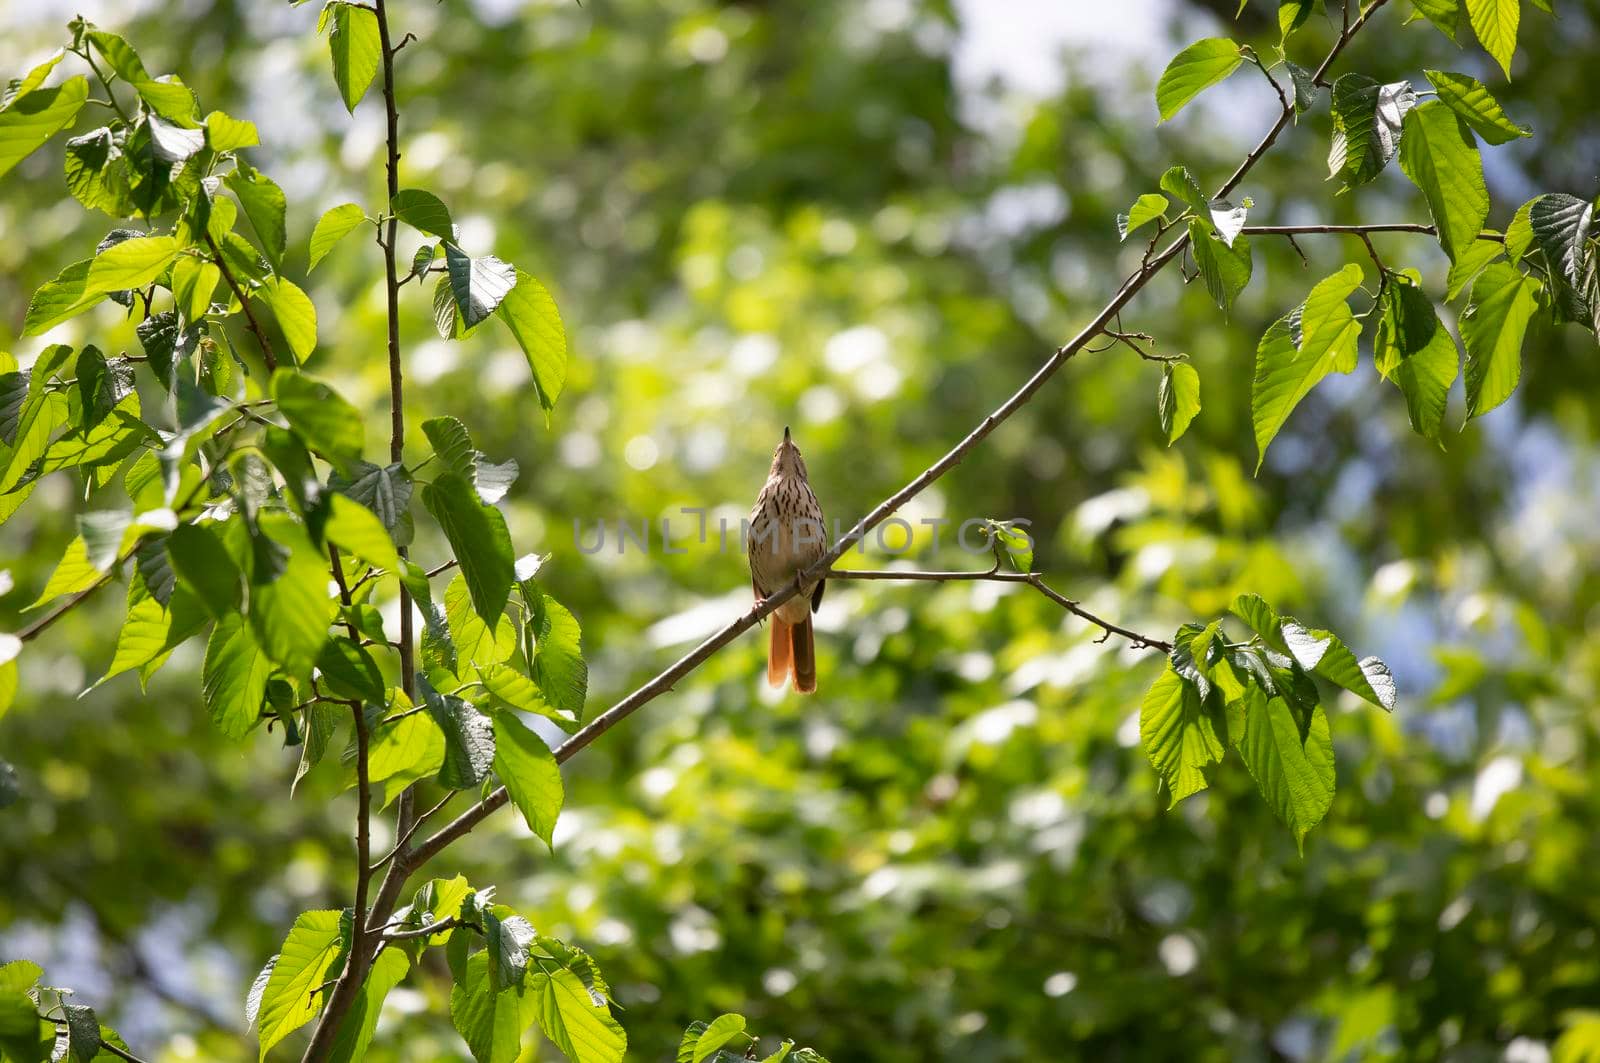 Brown thrasher (Toxostoma rufum) looking up from its perch on a tree branch